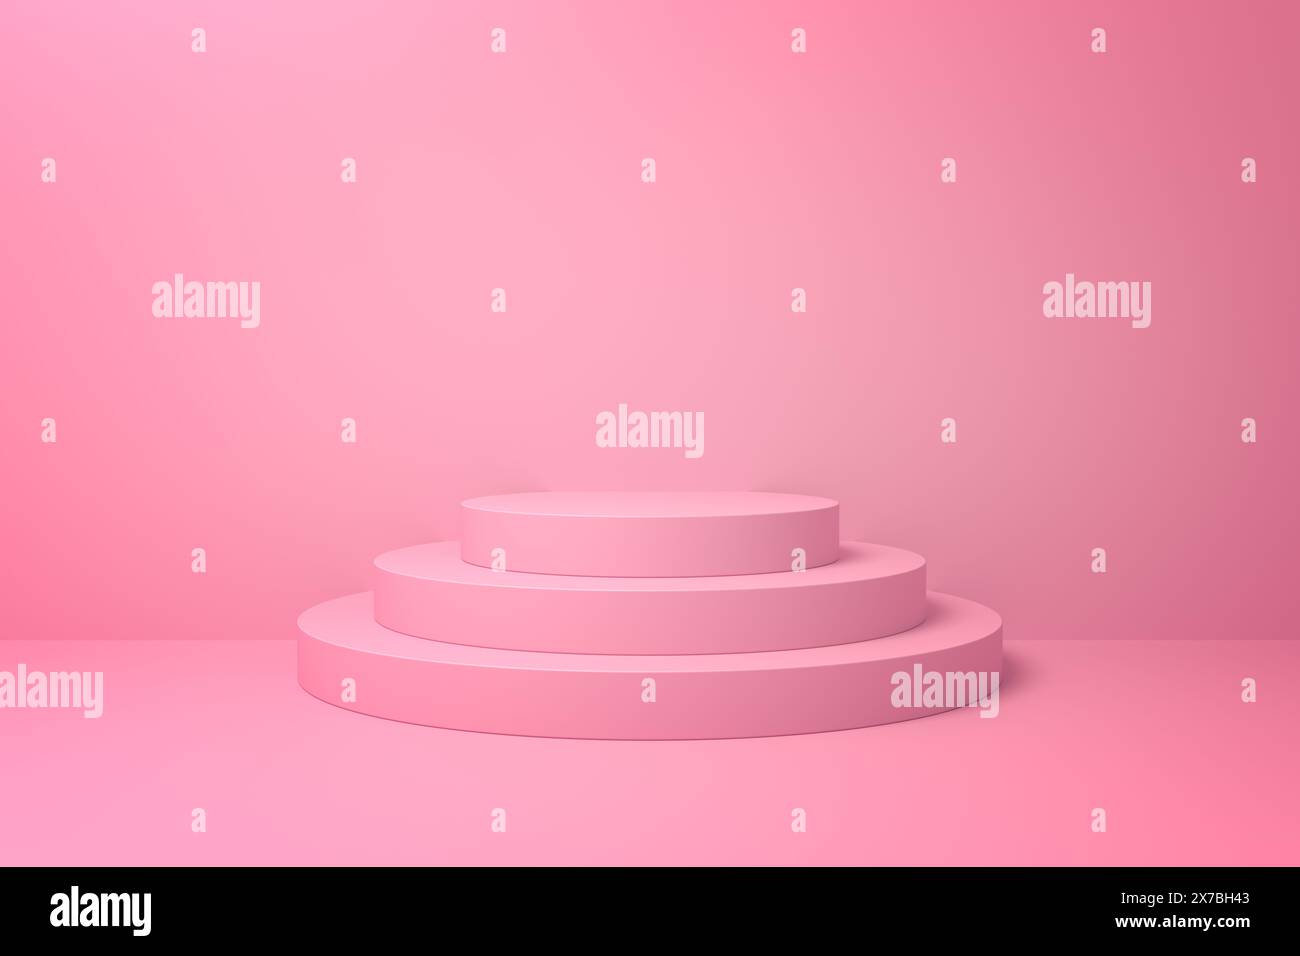 Circular stages with radiant steps in pink Stock Photo